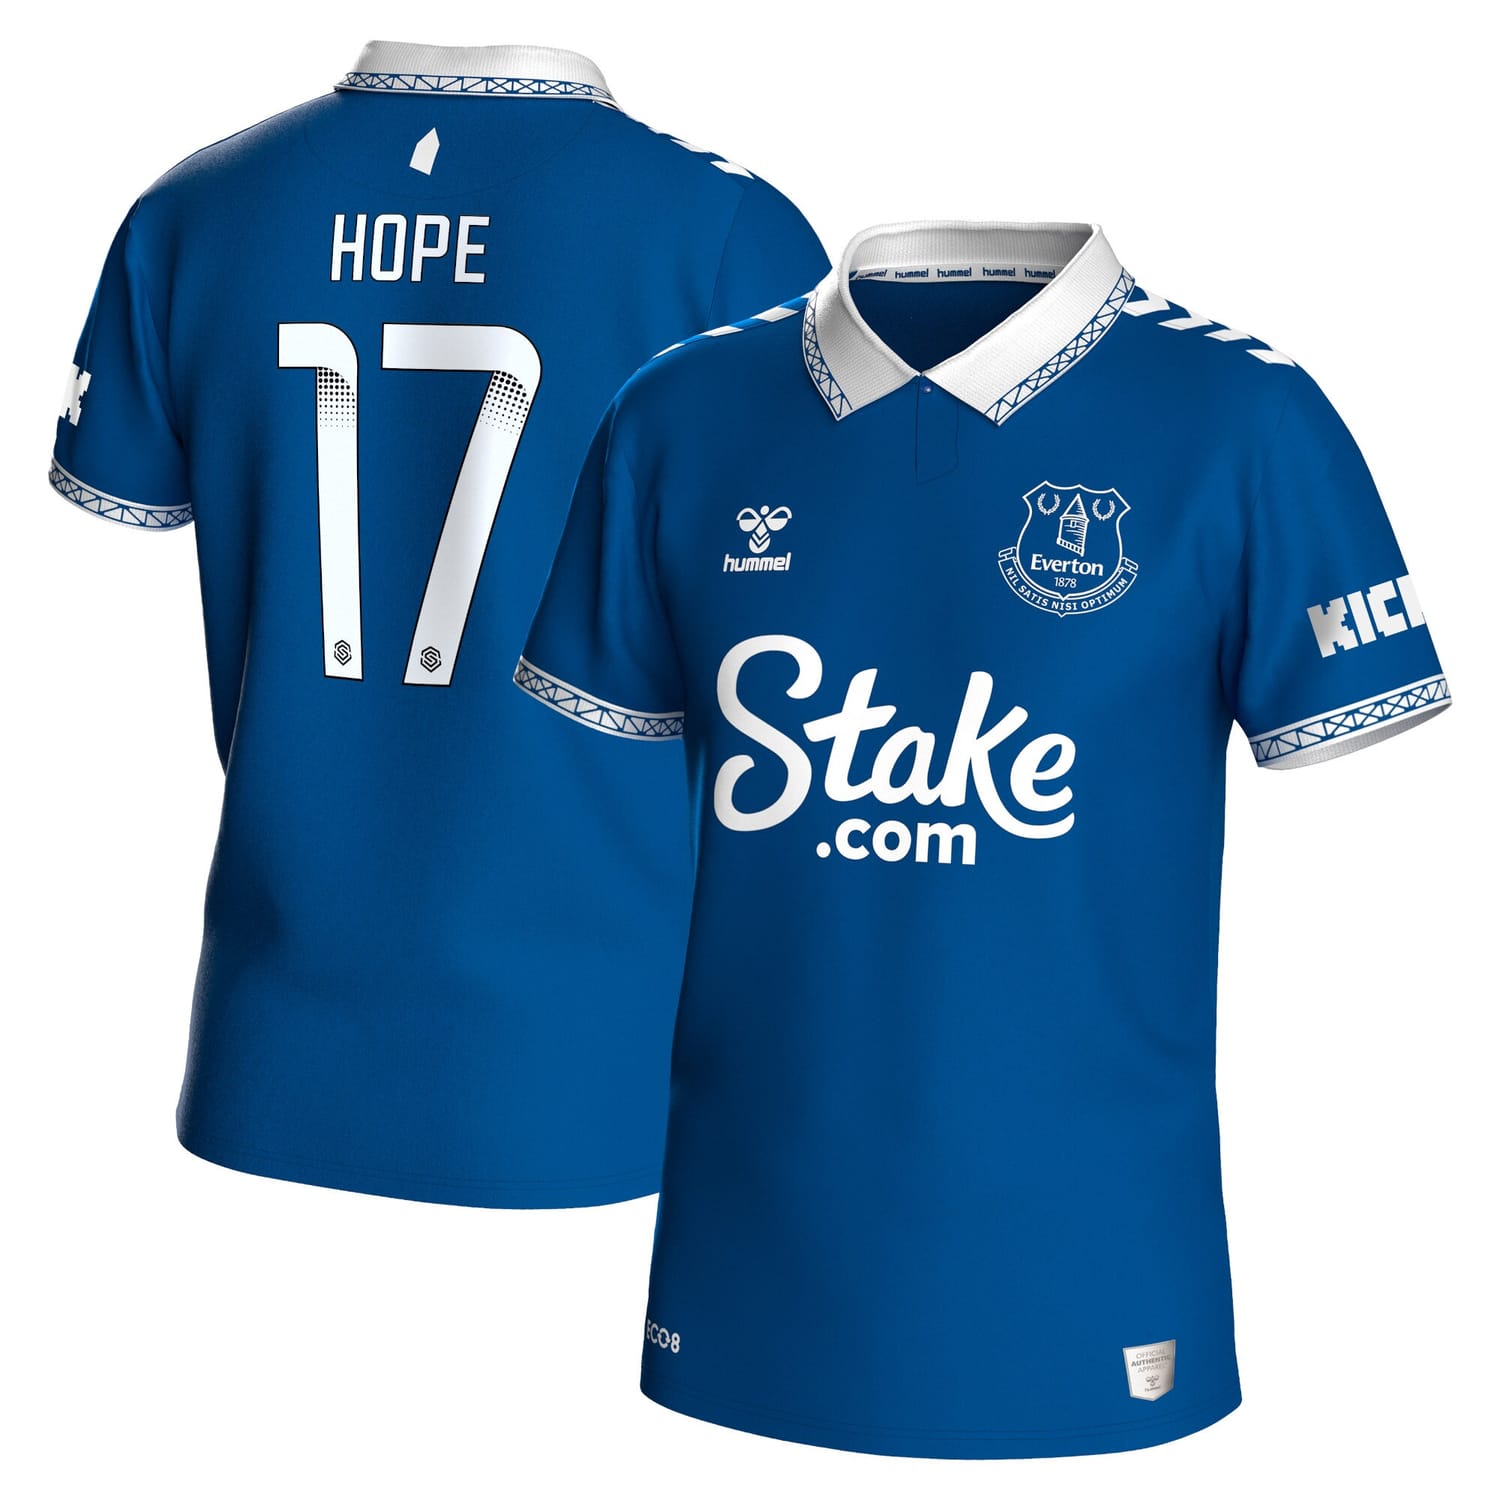 Premier League Everton Home WSL Jersey Shirt 2023-24 player Lucy Hope printing for Men